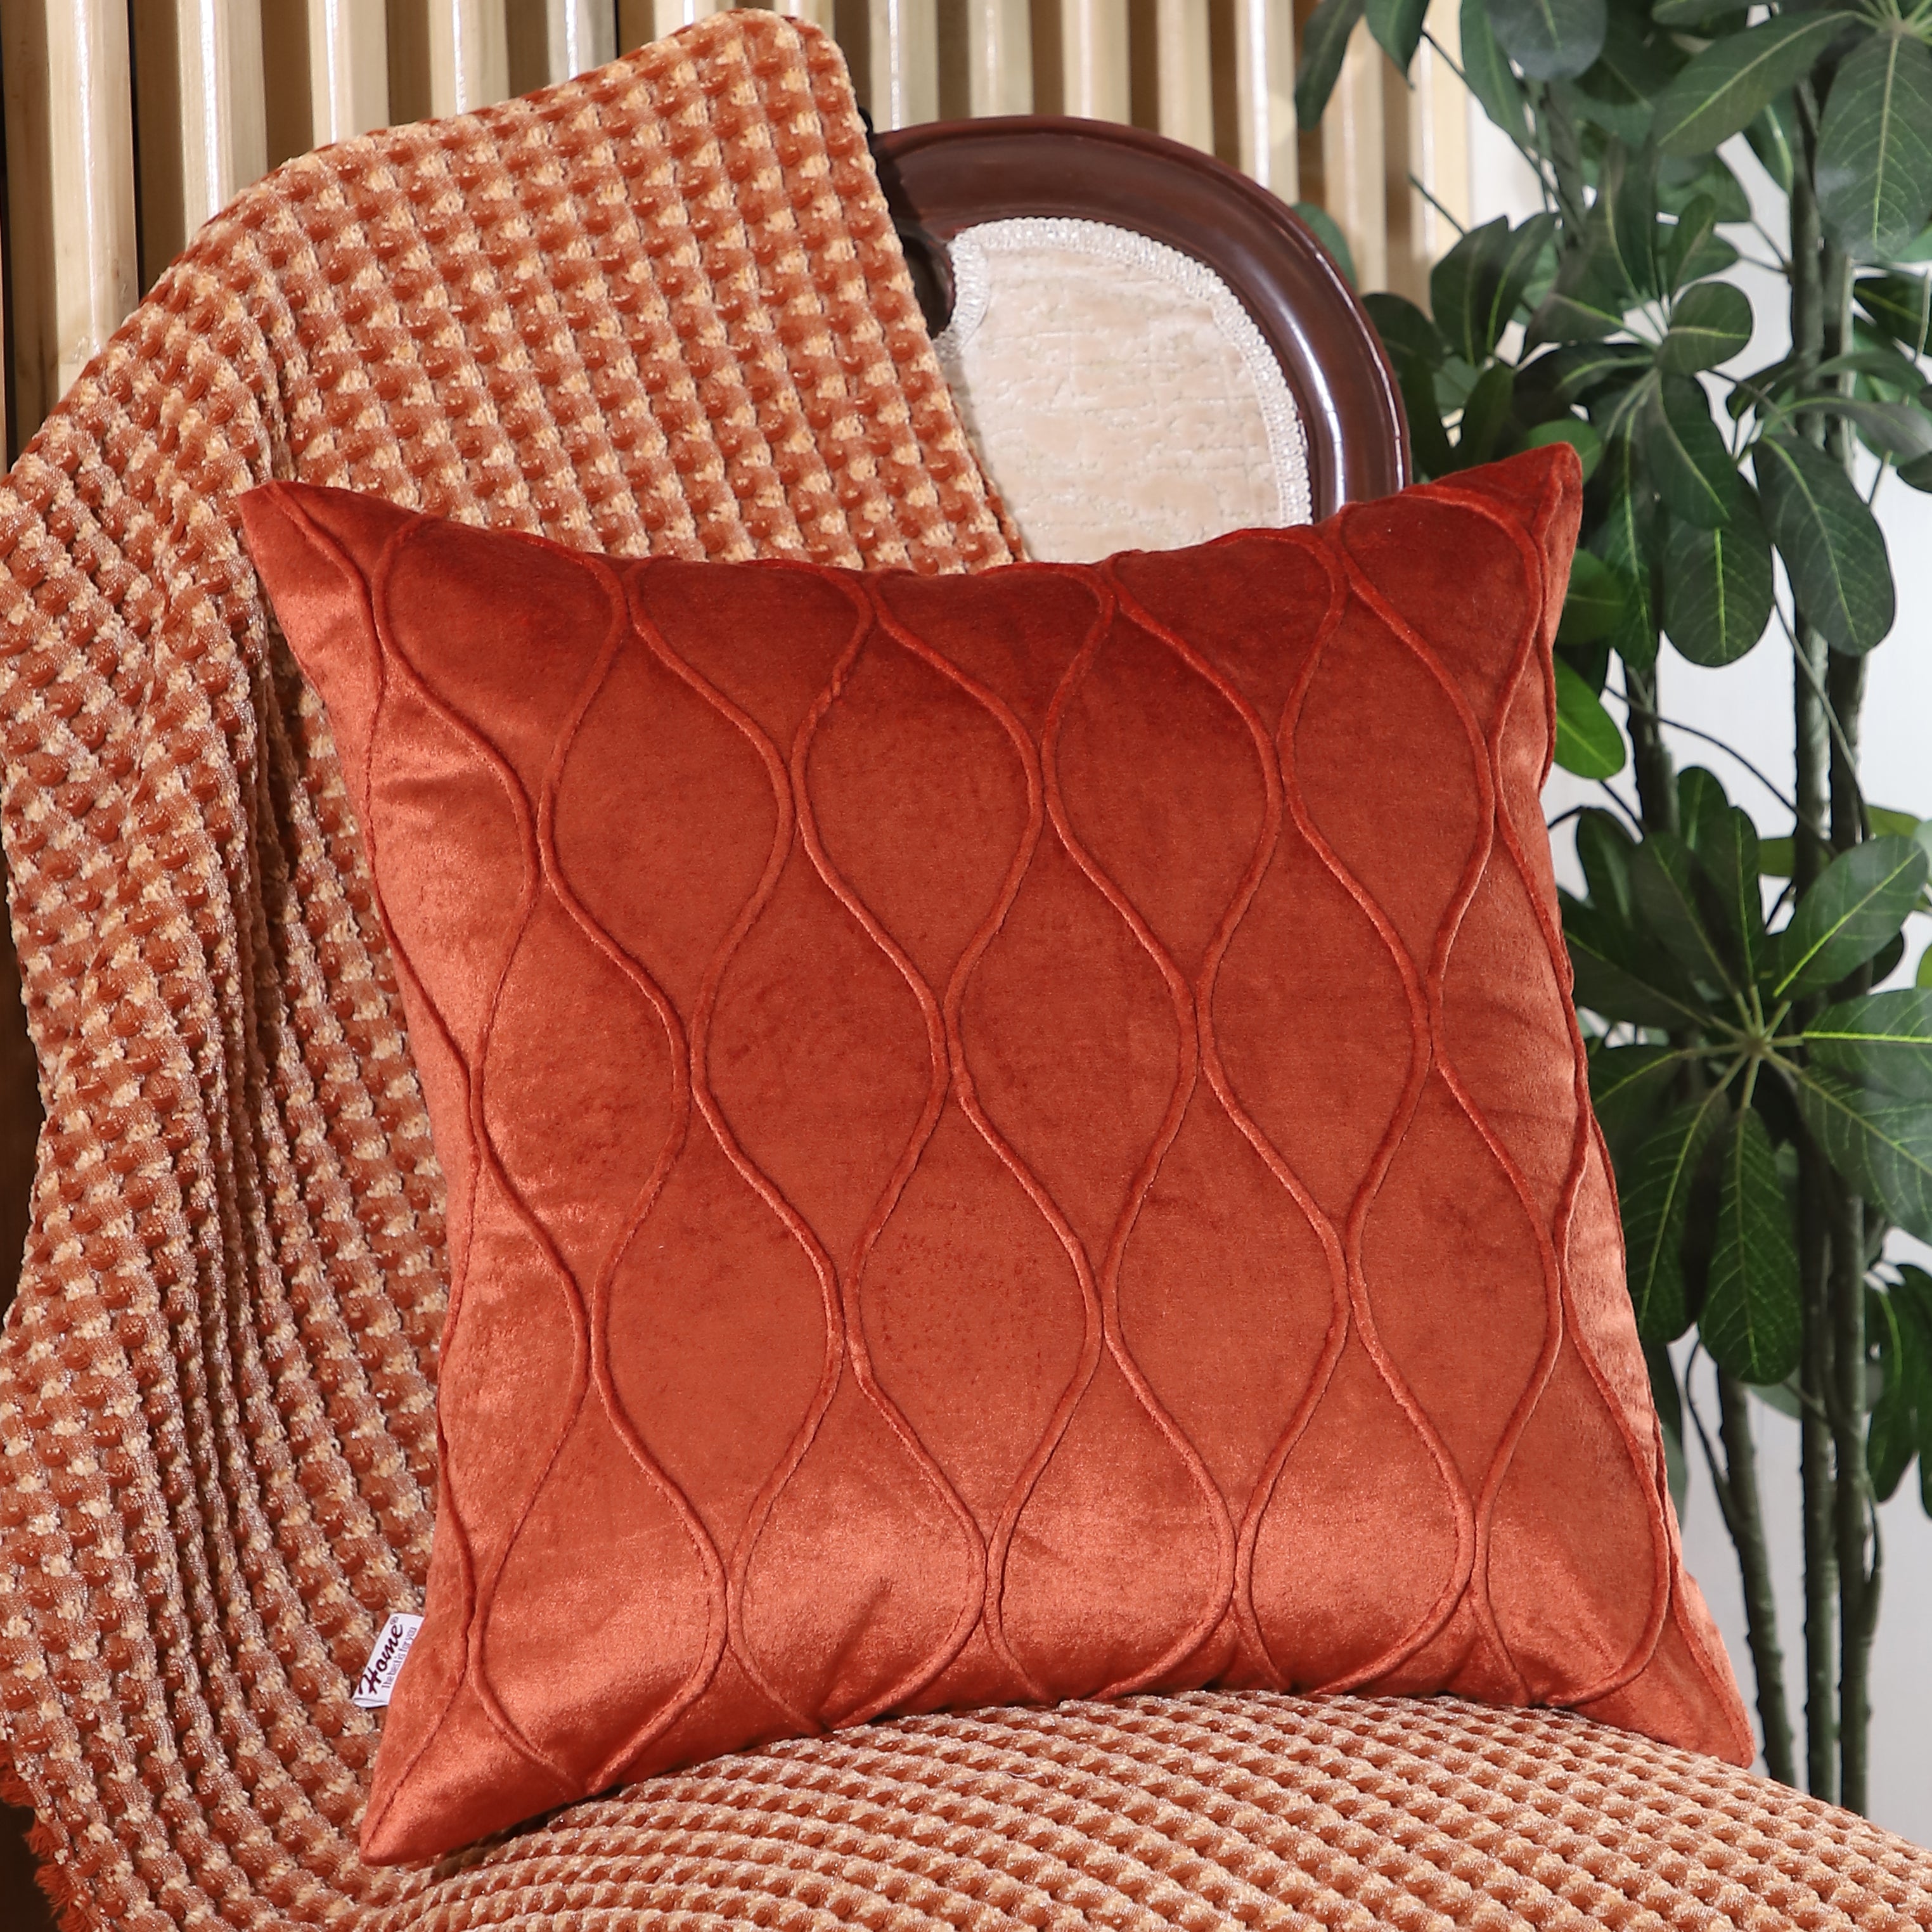 Rustic Luxe Embossed Diamond Pattern 16x16 Inch Cushion Cover